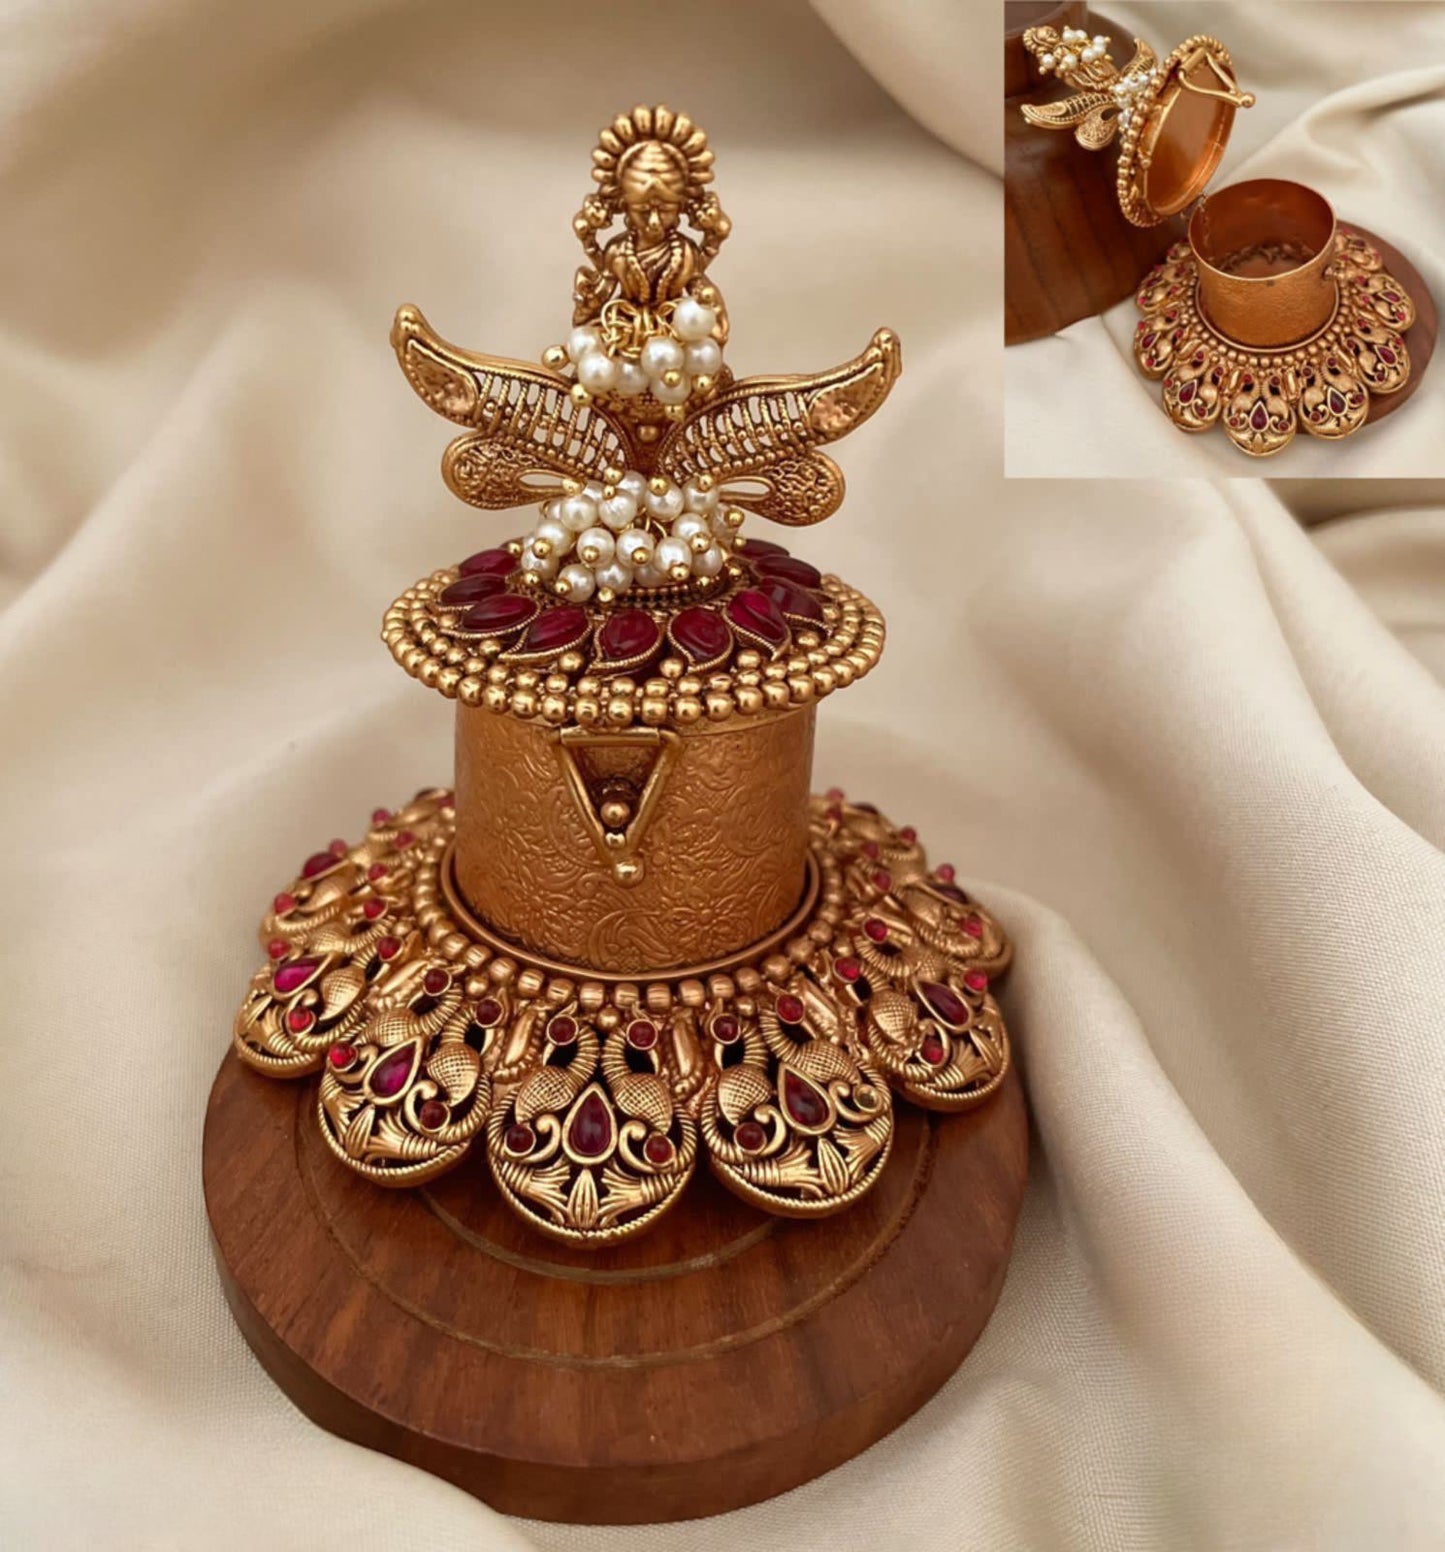 Gift these Beautiful kumkum boxes for You loved ones - Return Gifts